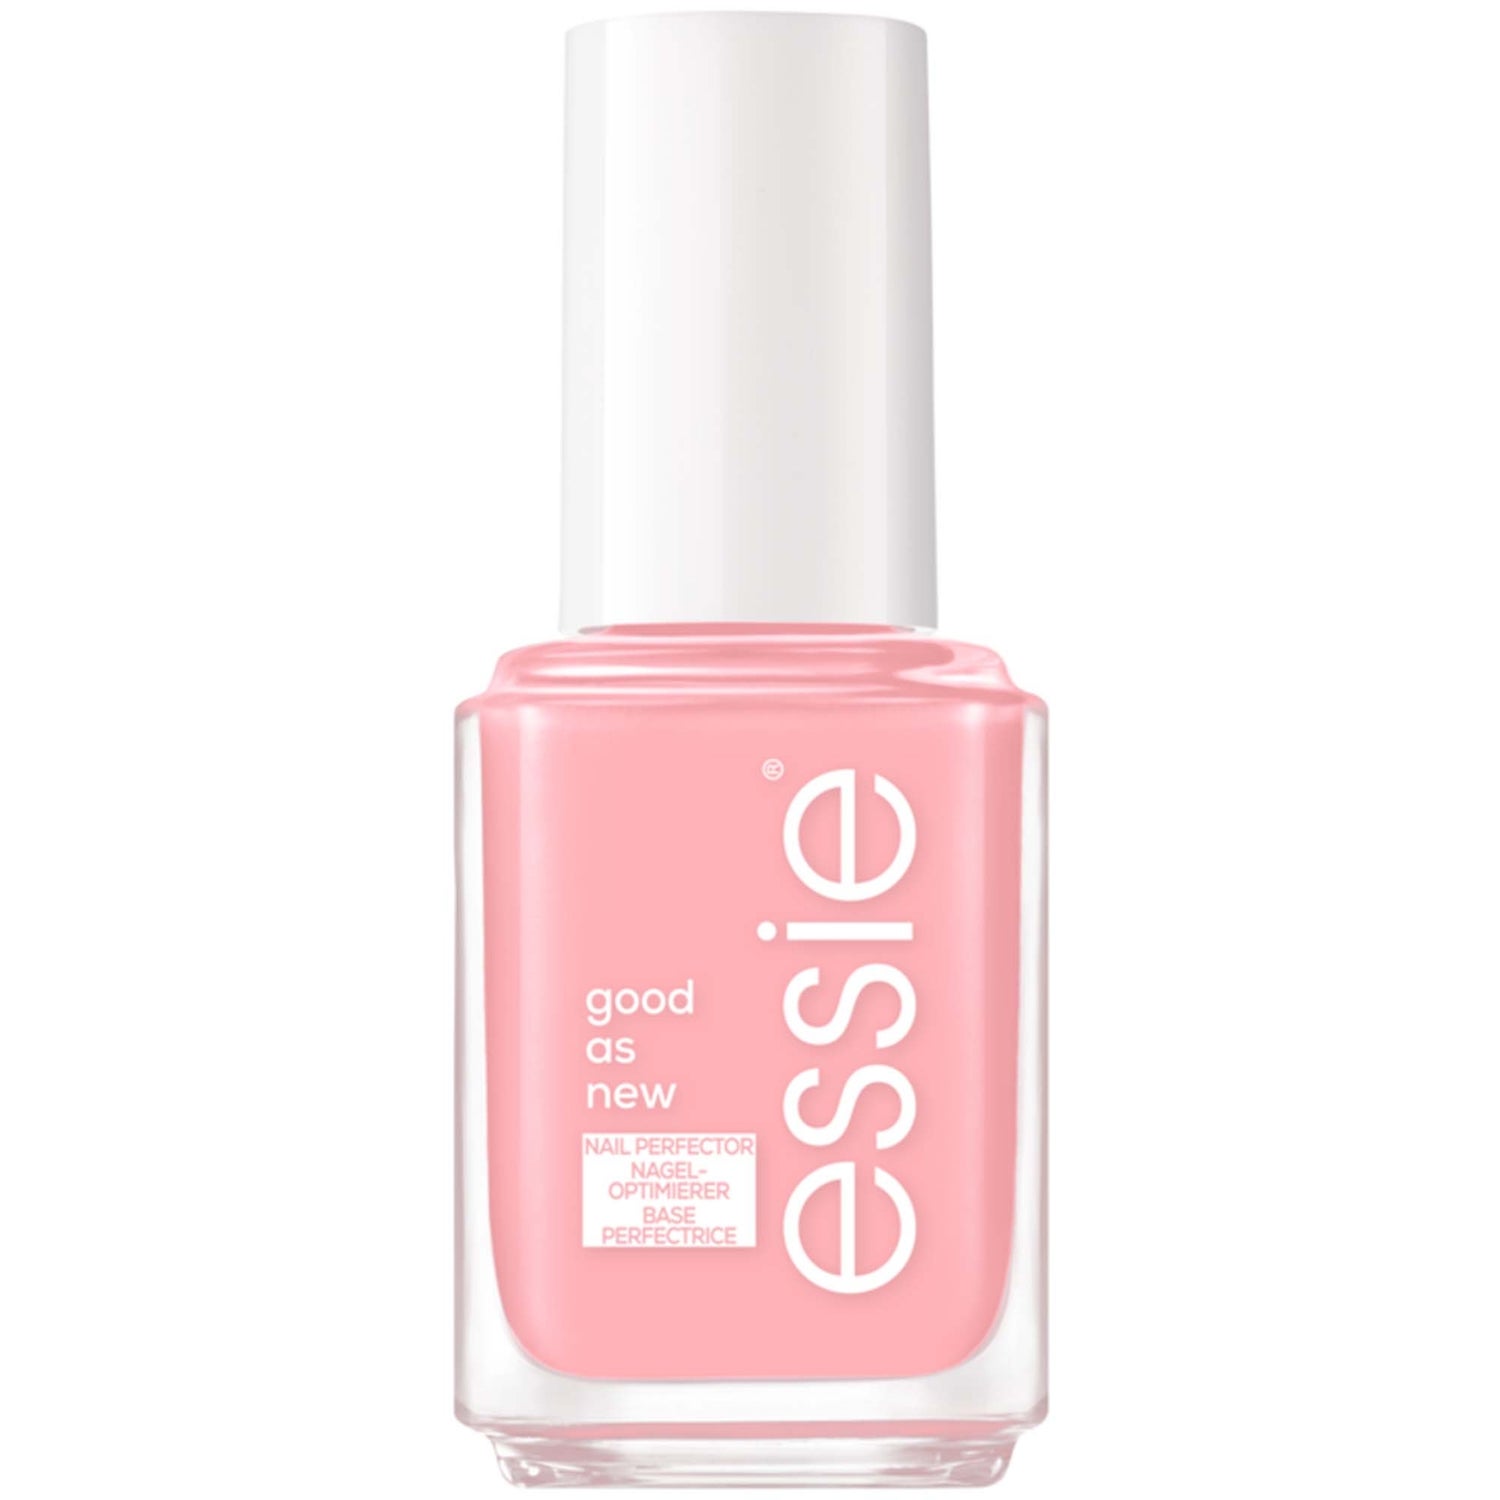 essie Nail Care Treatment Good As New Nail Perfector Nail Concealer Corrector - Light Pink